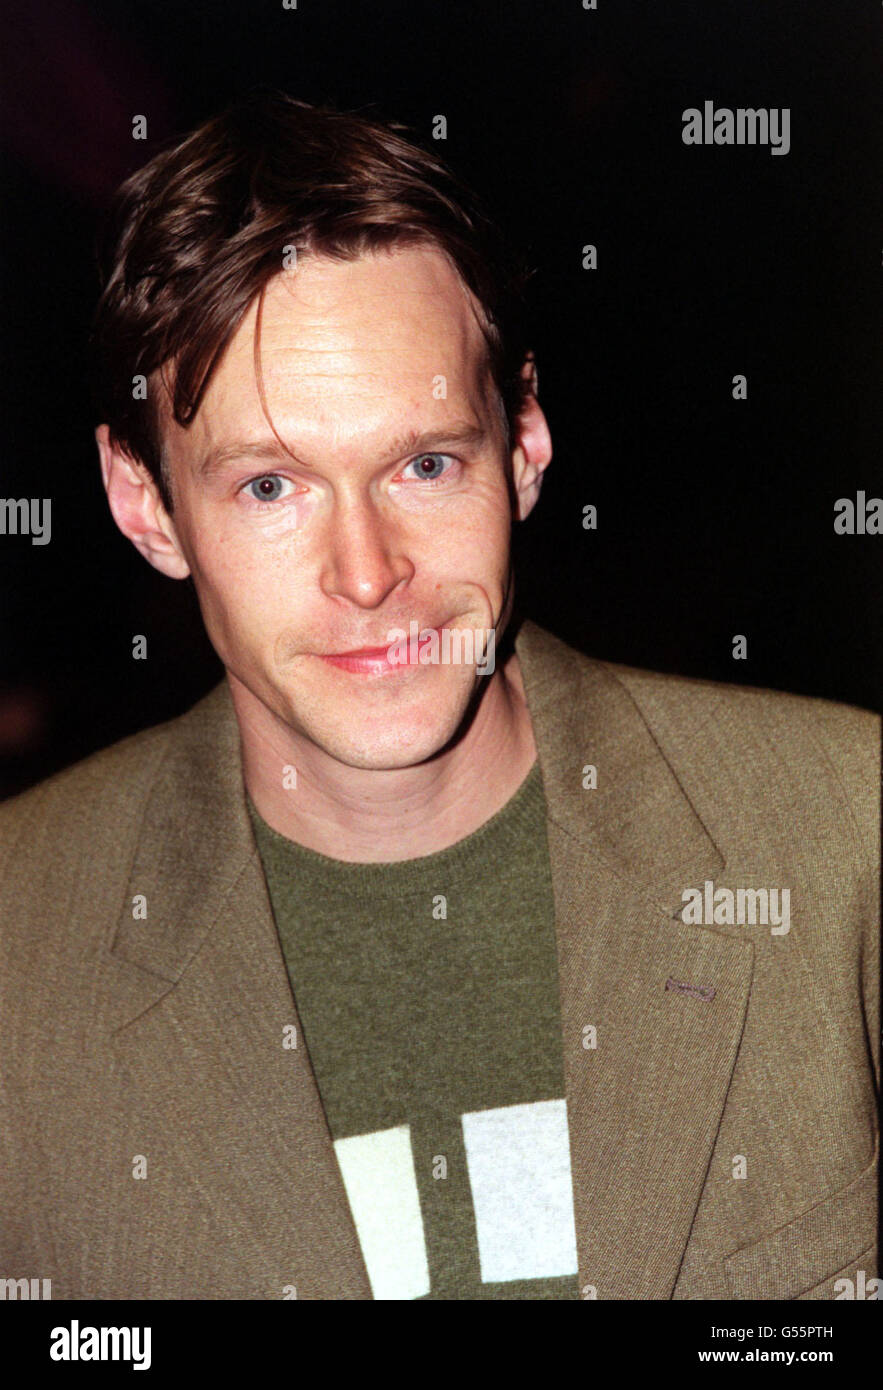 Actor Steven Mackintosh arrives for the Premiere of 'Almost Famous' at the Opening Gala of the London Film Festival being held at the Odeon Leicester Square, London. Stock Photo